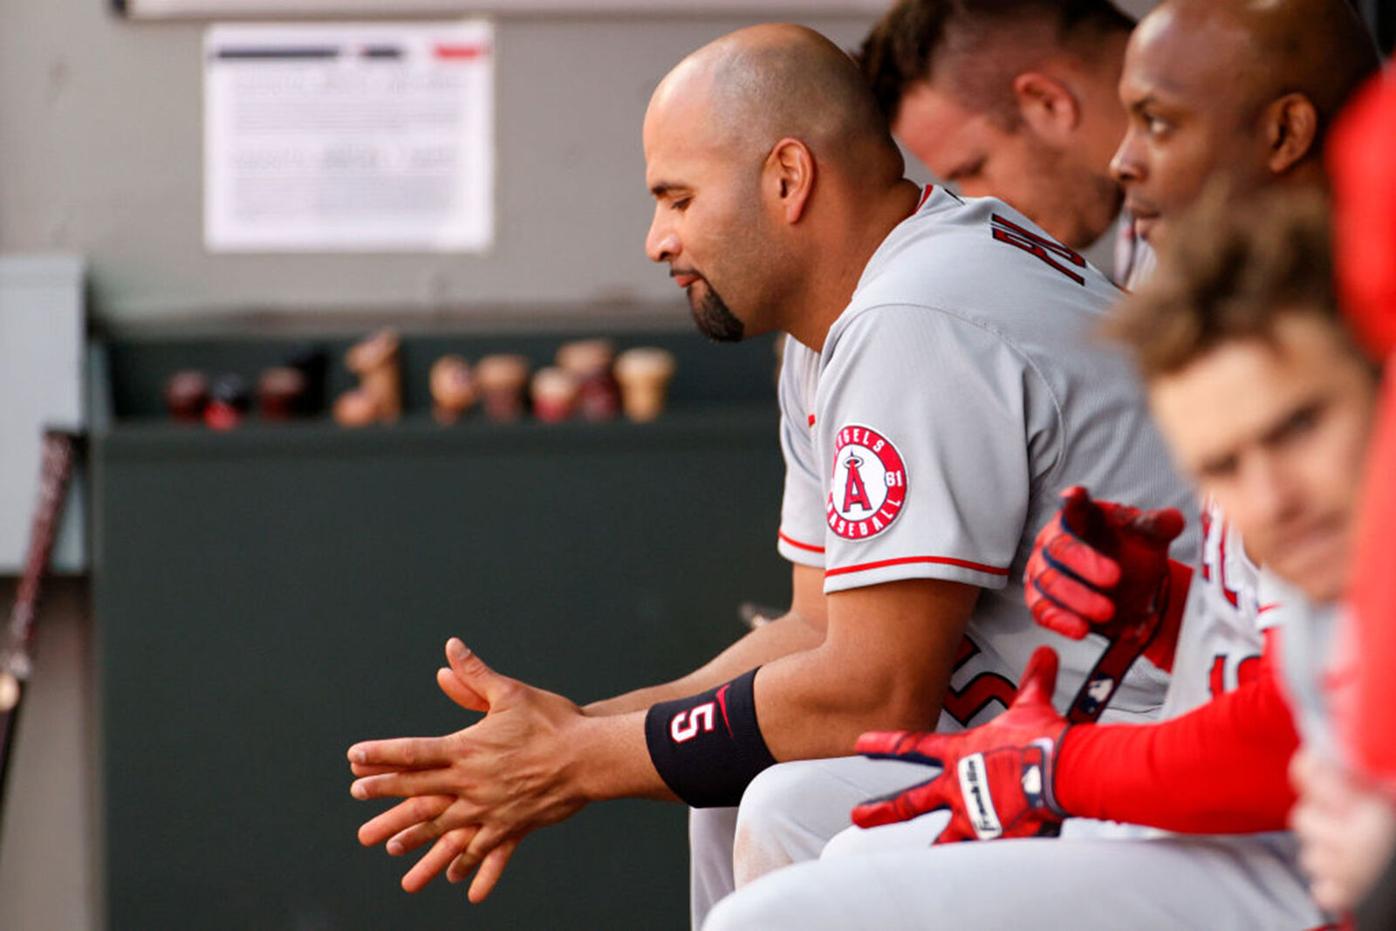 Why didn't you guys retire?': Albert Pujols' hilarious message to